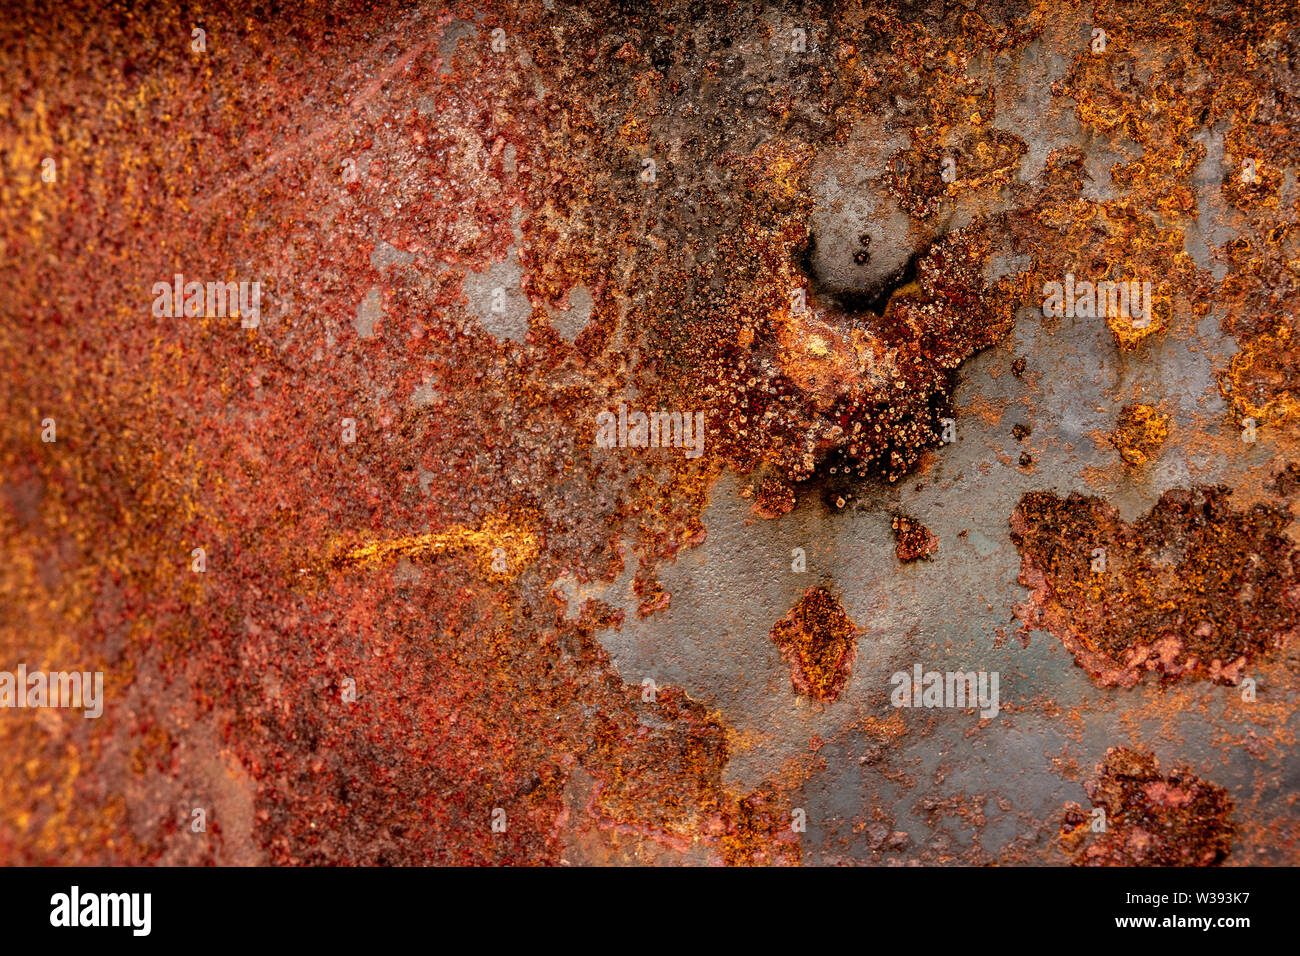 Rusty Corrosion Oxidized Iron Texture Surface. Old Metal Rusted Grunge Abstract Background. Stock Photo